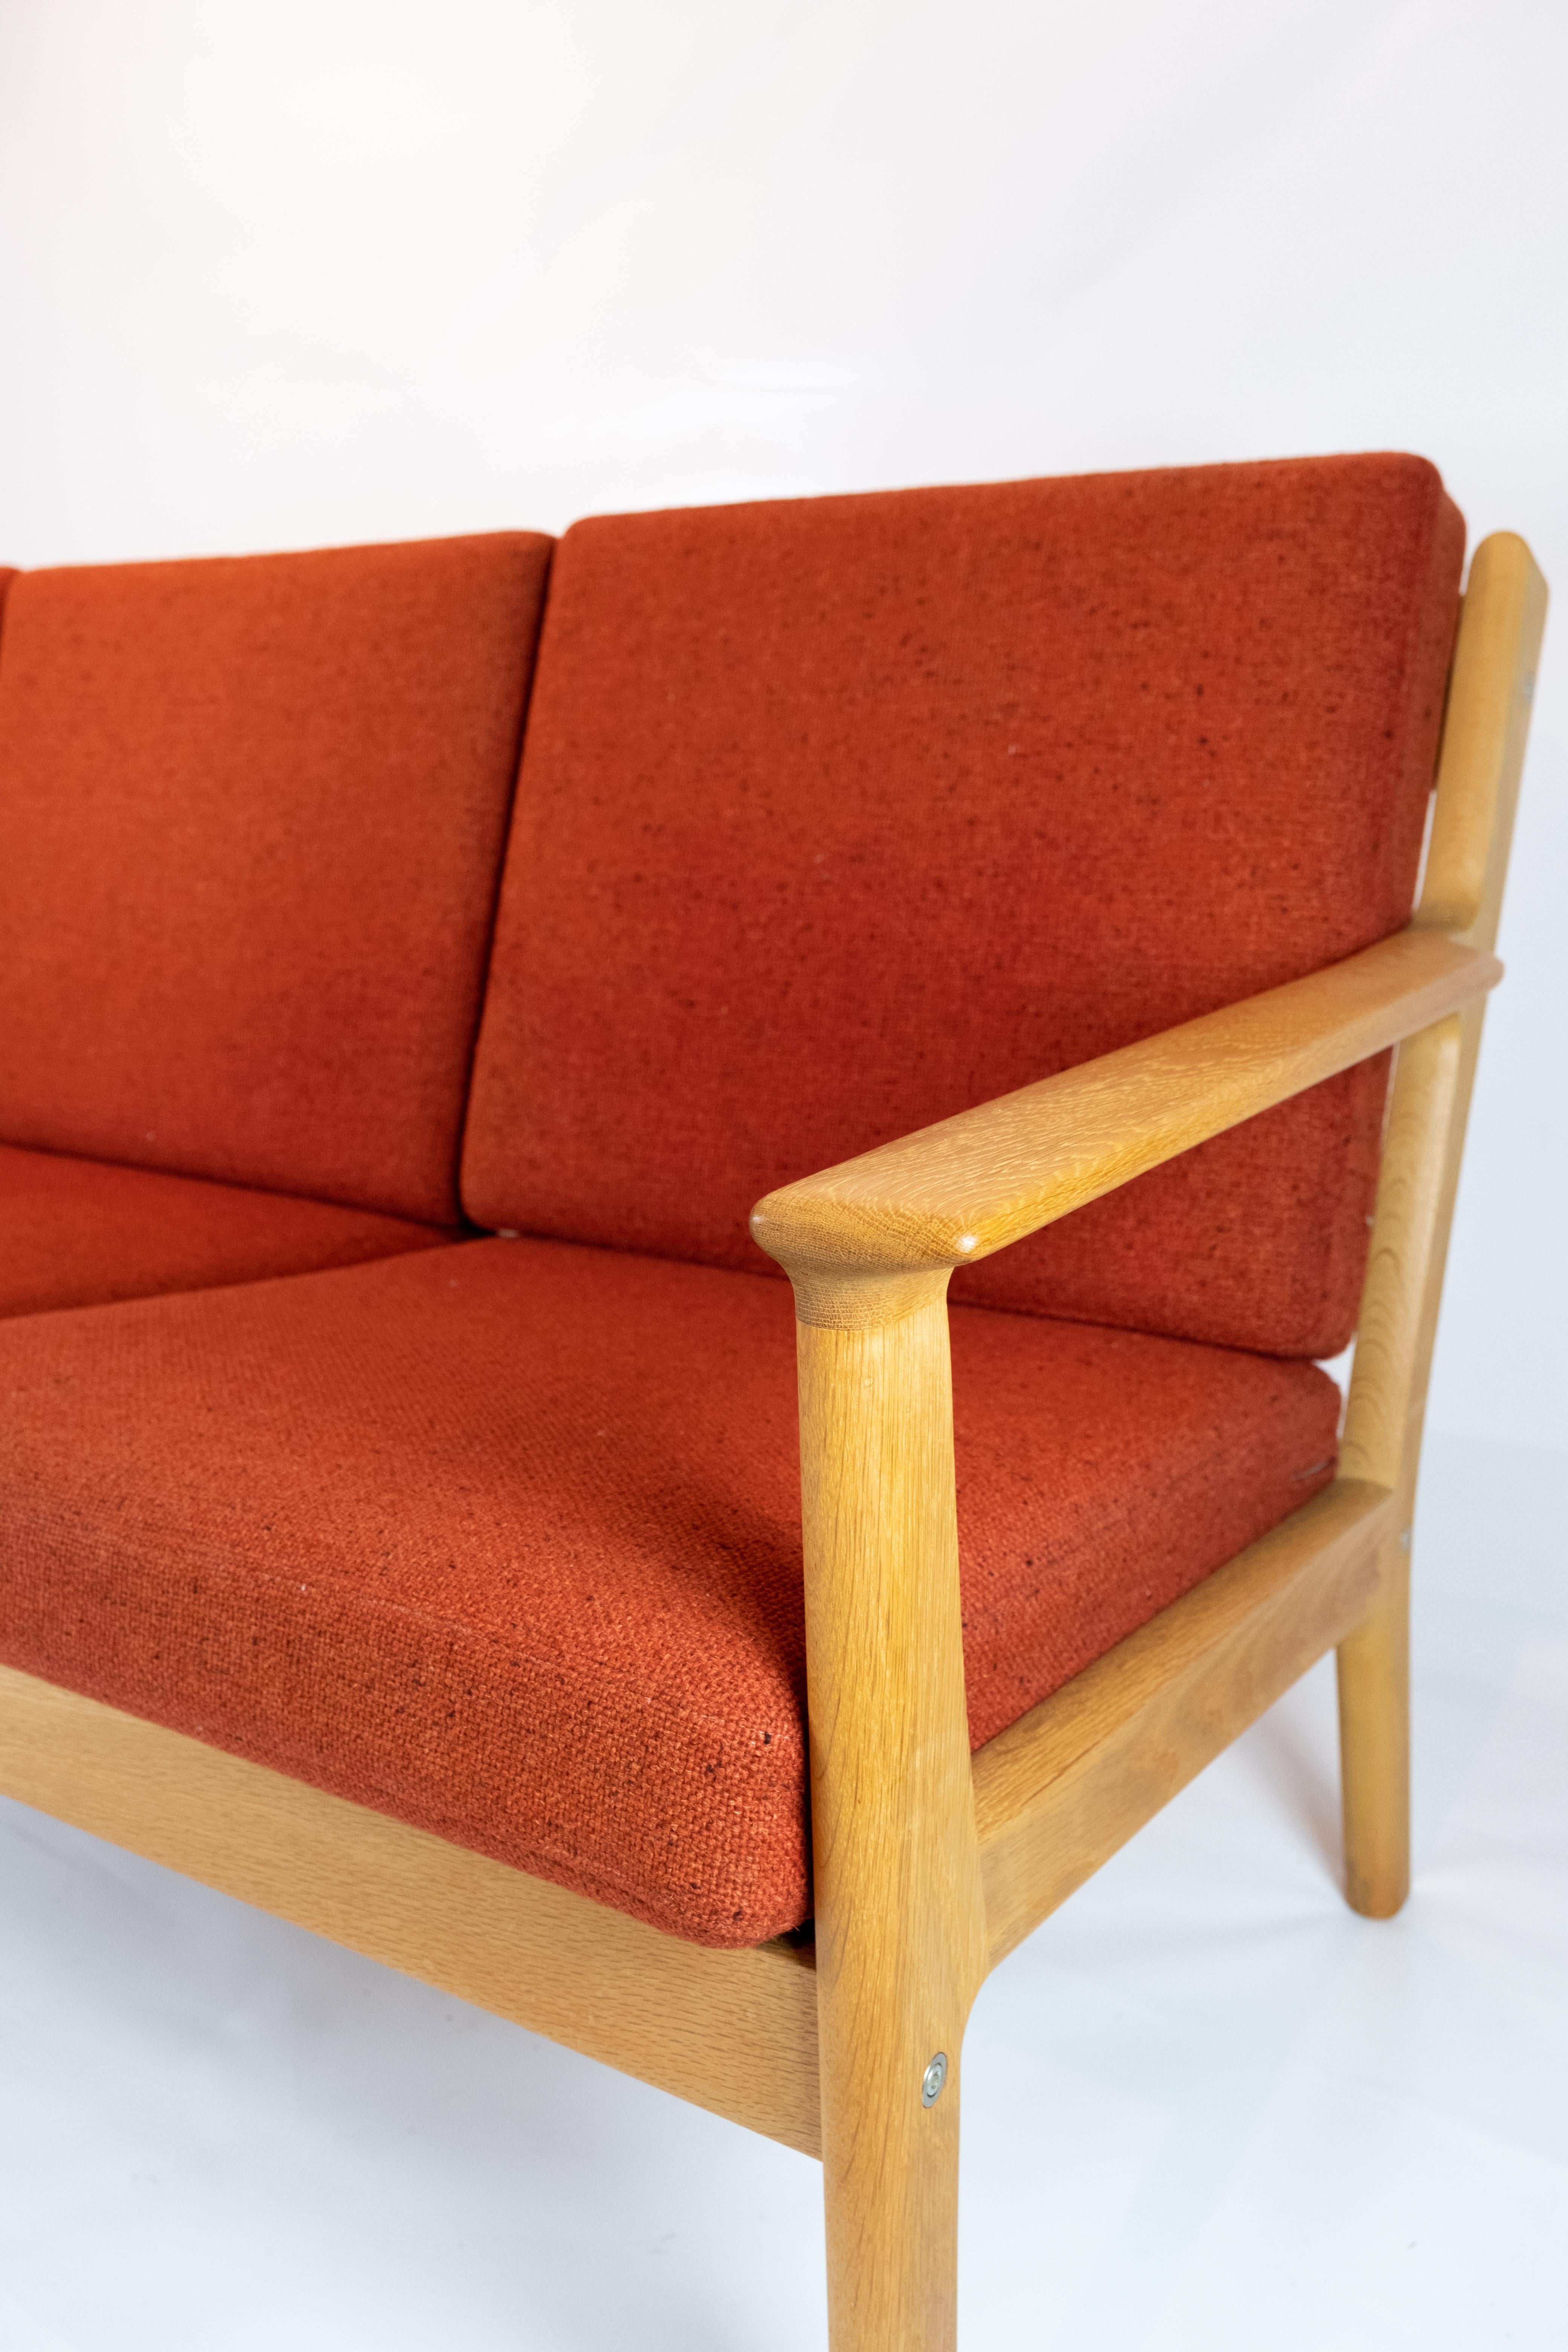 Mid-20th Century Three-Seat Sofa of Oak and Red Wool Fabric by Hans J. Wegner and GETAMA For Sale